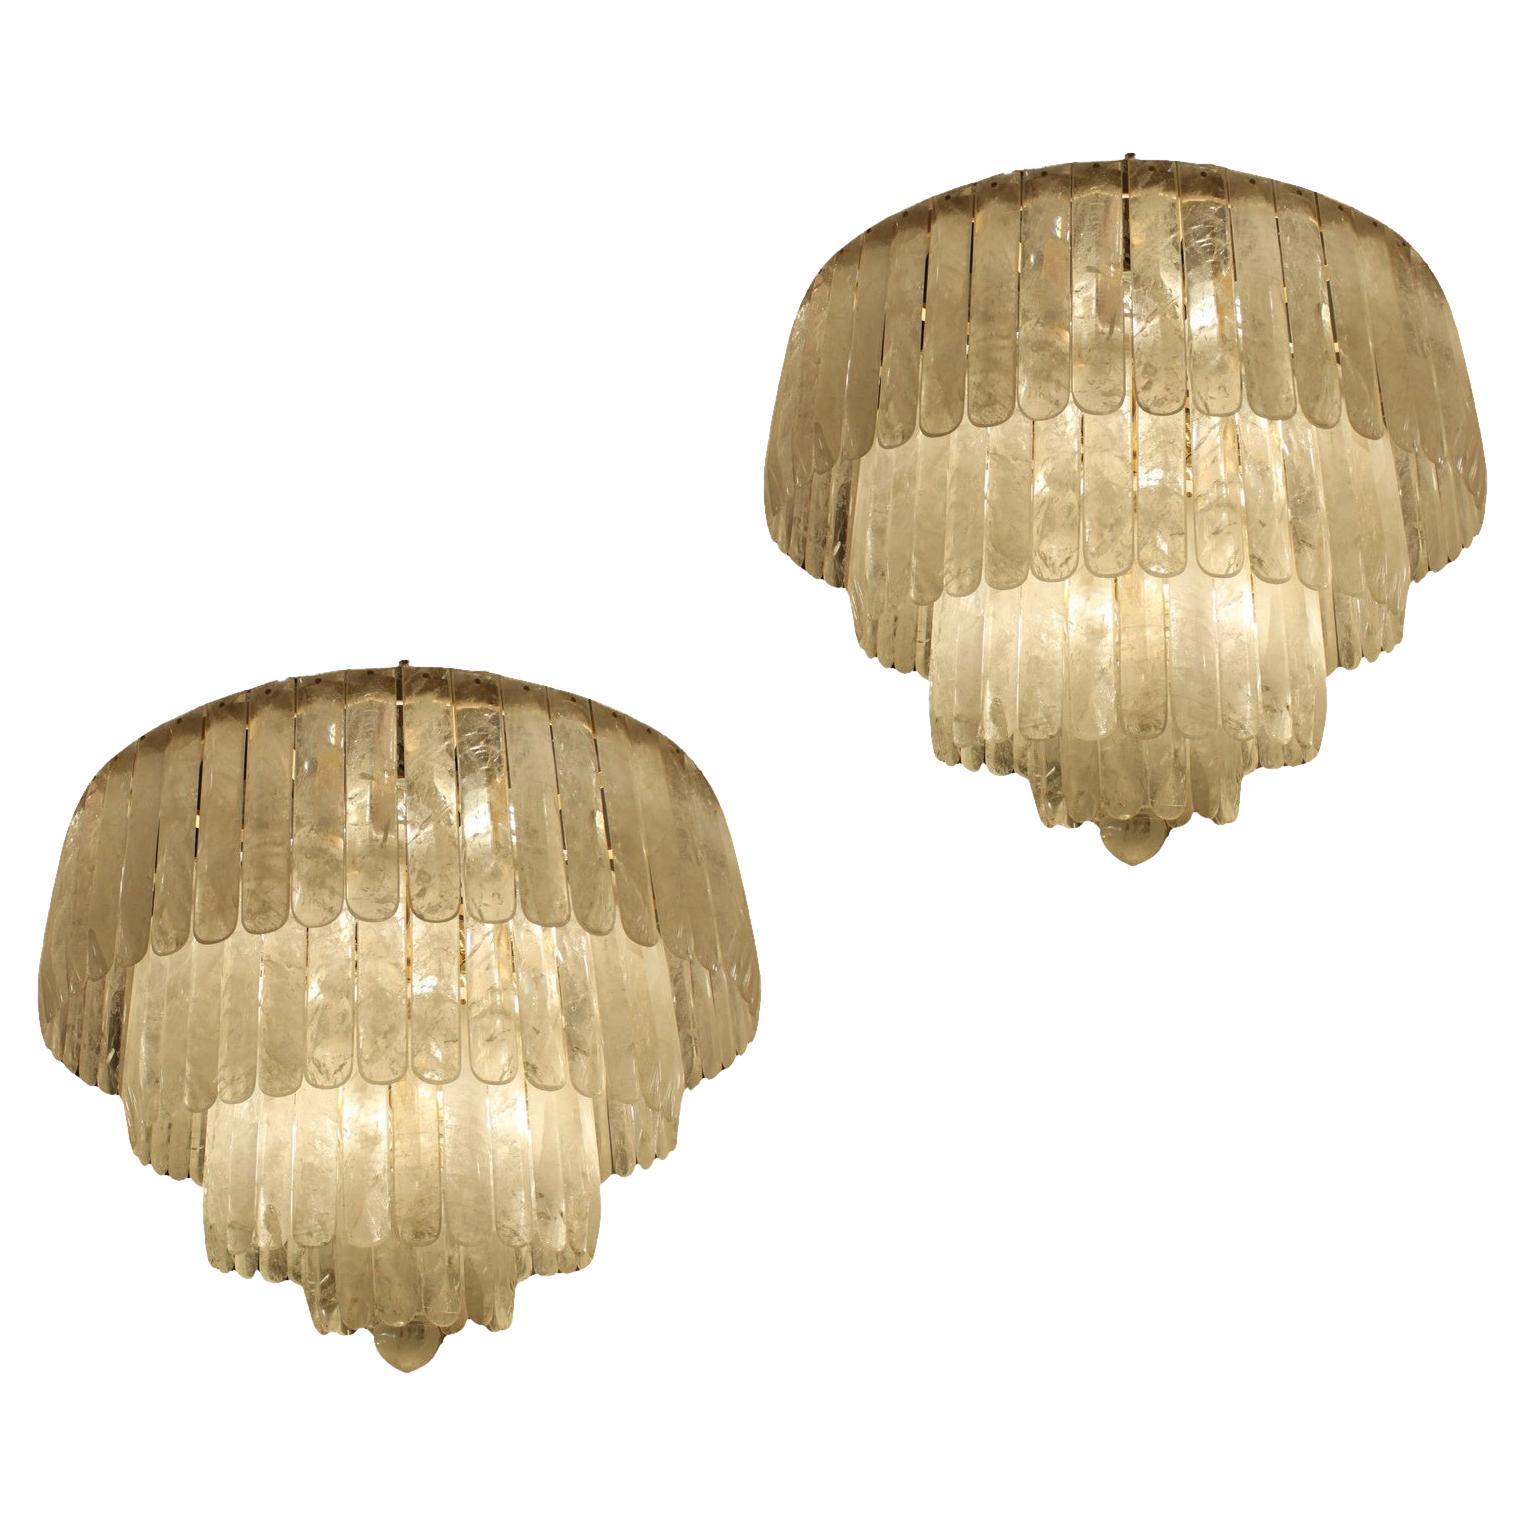 Spectacular Pair of Circular Tiered Rock Crystal Chandeliers For Sale